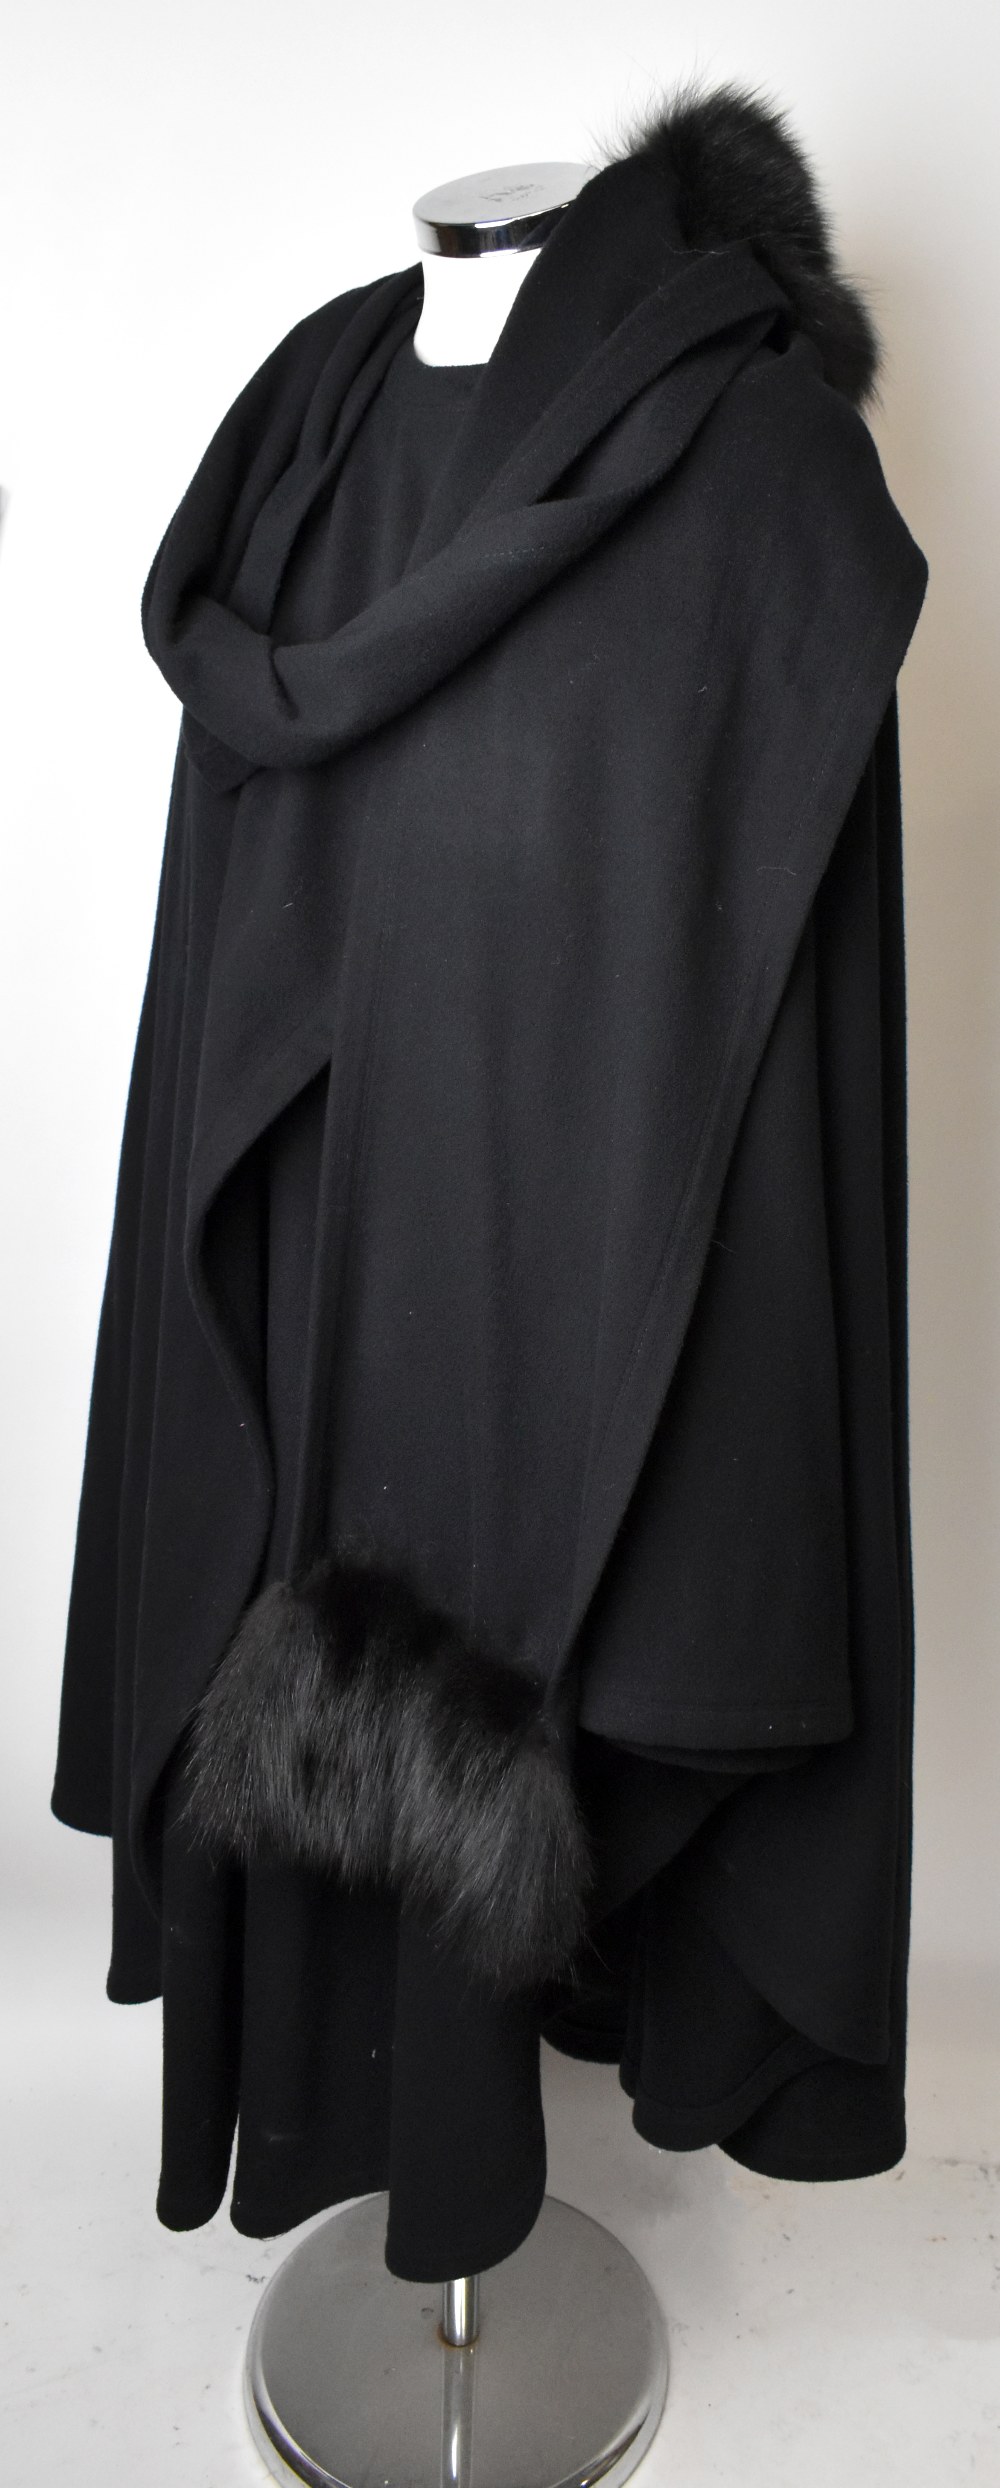 LOUIS FERAUD; a wool and cashmere full length black cape coat with button top slit pockets and a